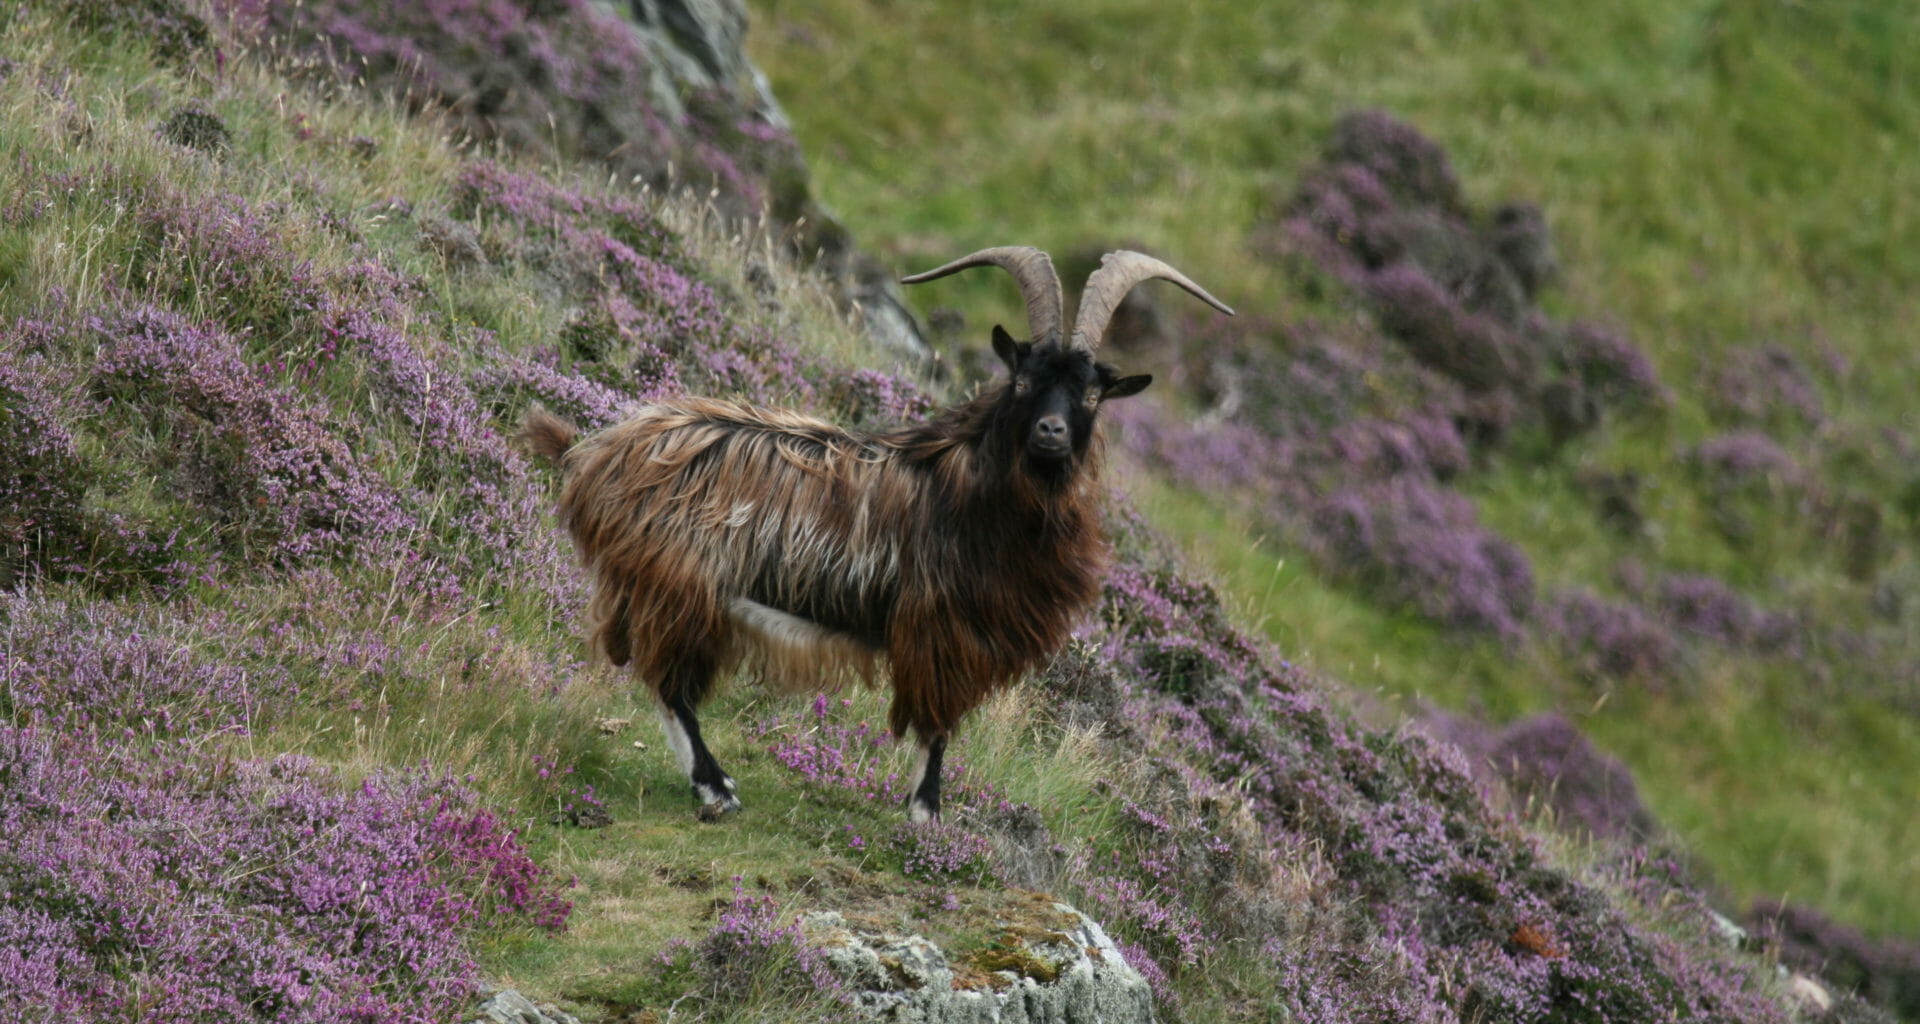 Goat trophy hunting continues years after Scottish Government review vow 1